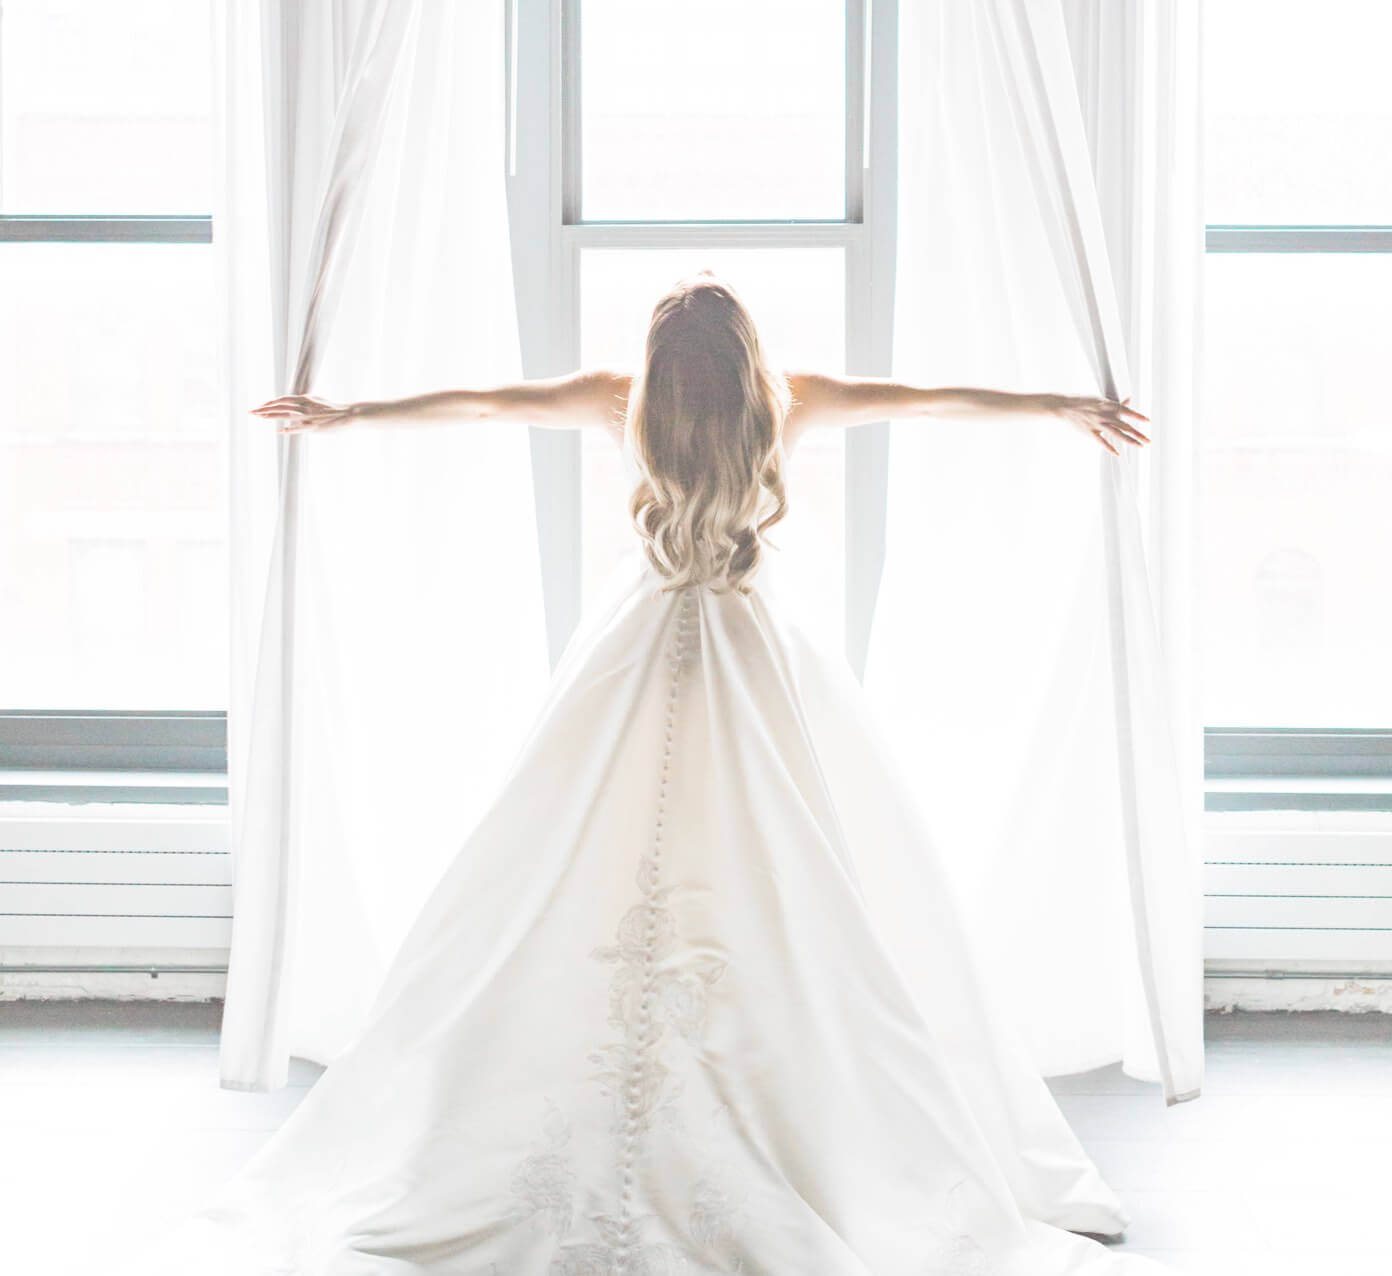 Photo of a model in a long white gown